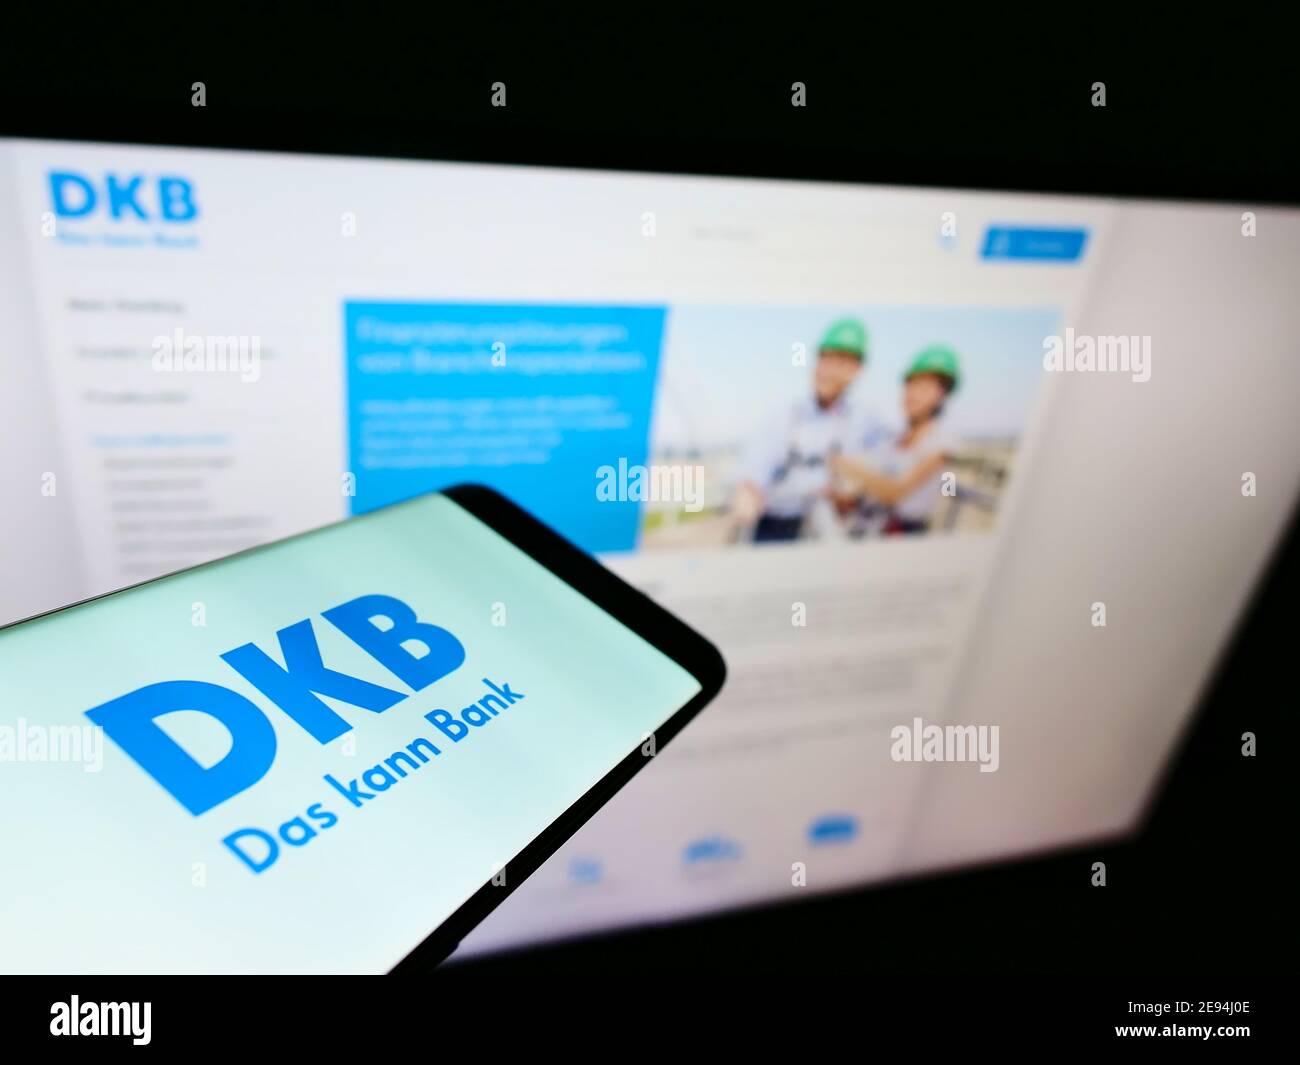 Smartphone with company logo of German direct bank Deutsche Kreditbank (DKB) on display in front of business web page. Focus on mobile phone screen. Stock Photo